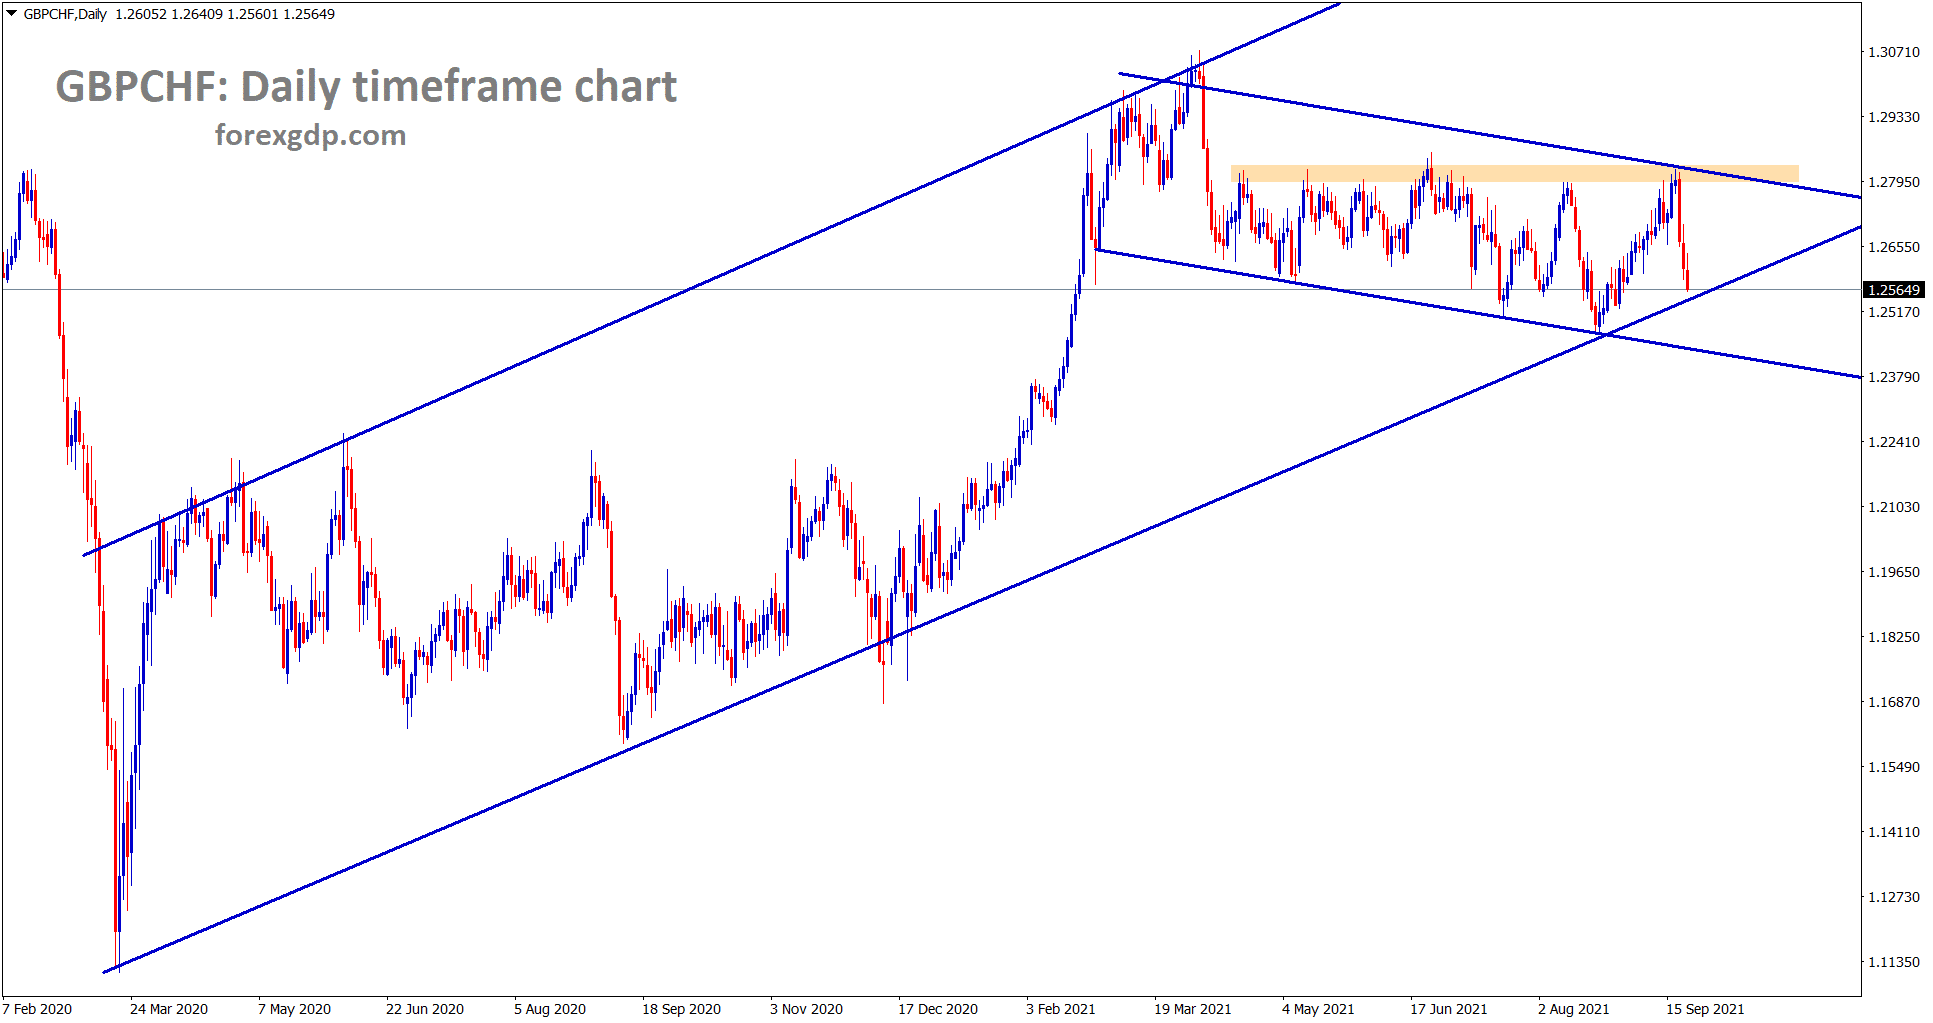 GBPCHF has fallen again to the higher low of the uptrend line